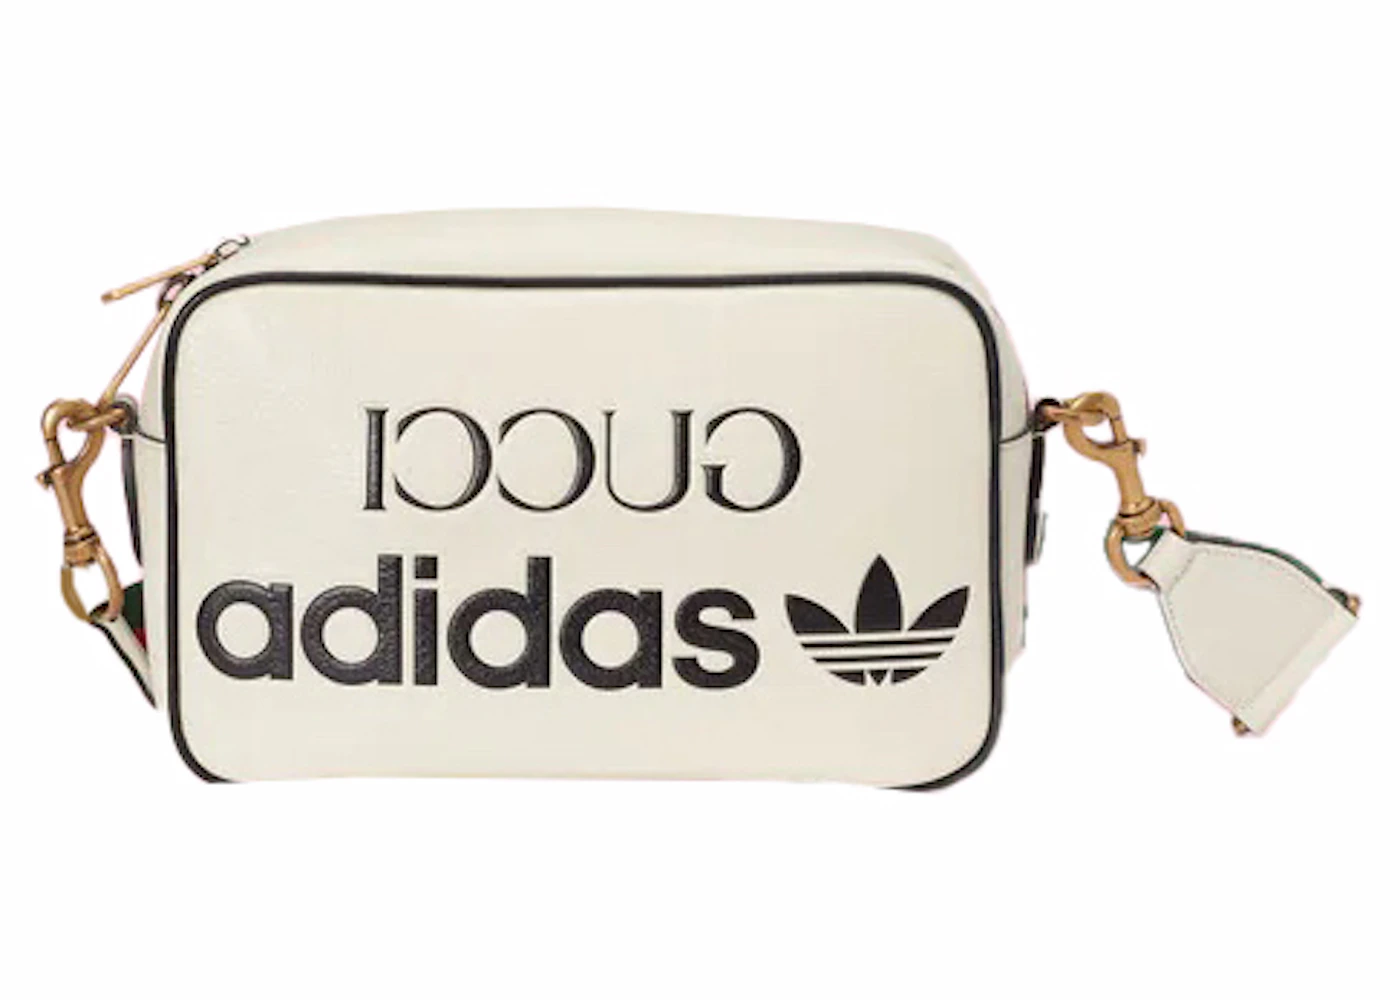 Gucci x adidas Mini Duffle Bag Beige/Brown in Leather with Gold